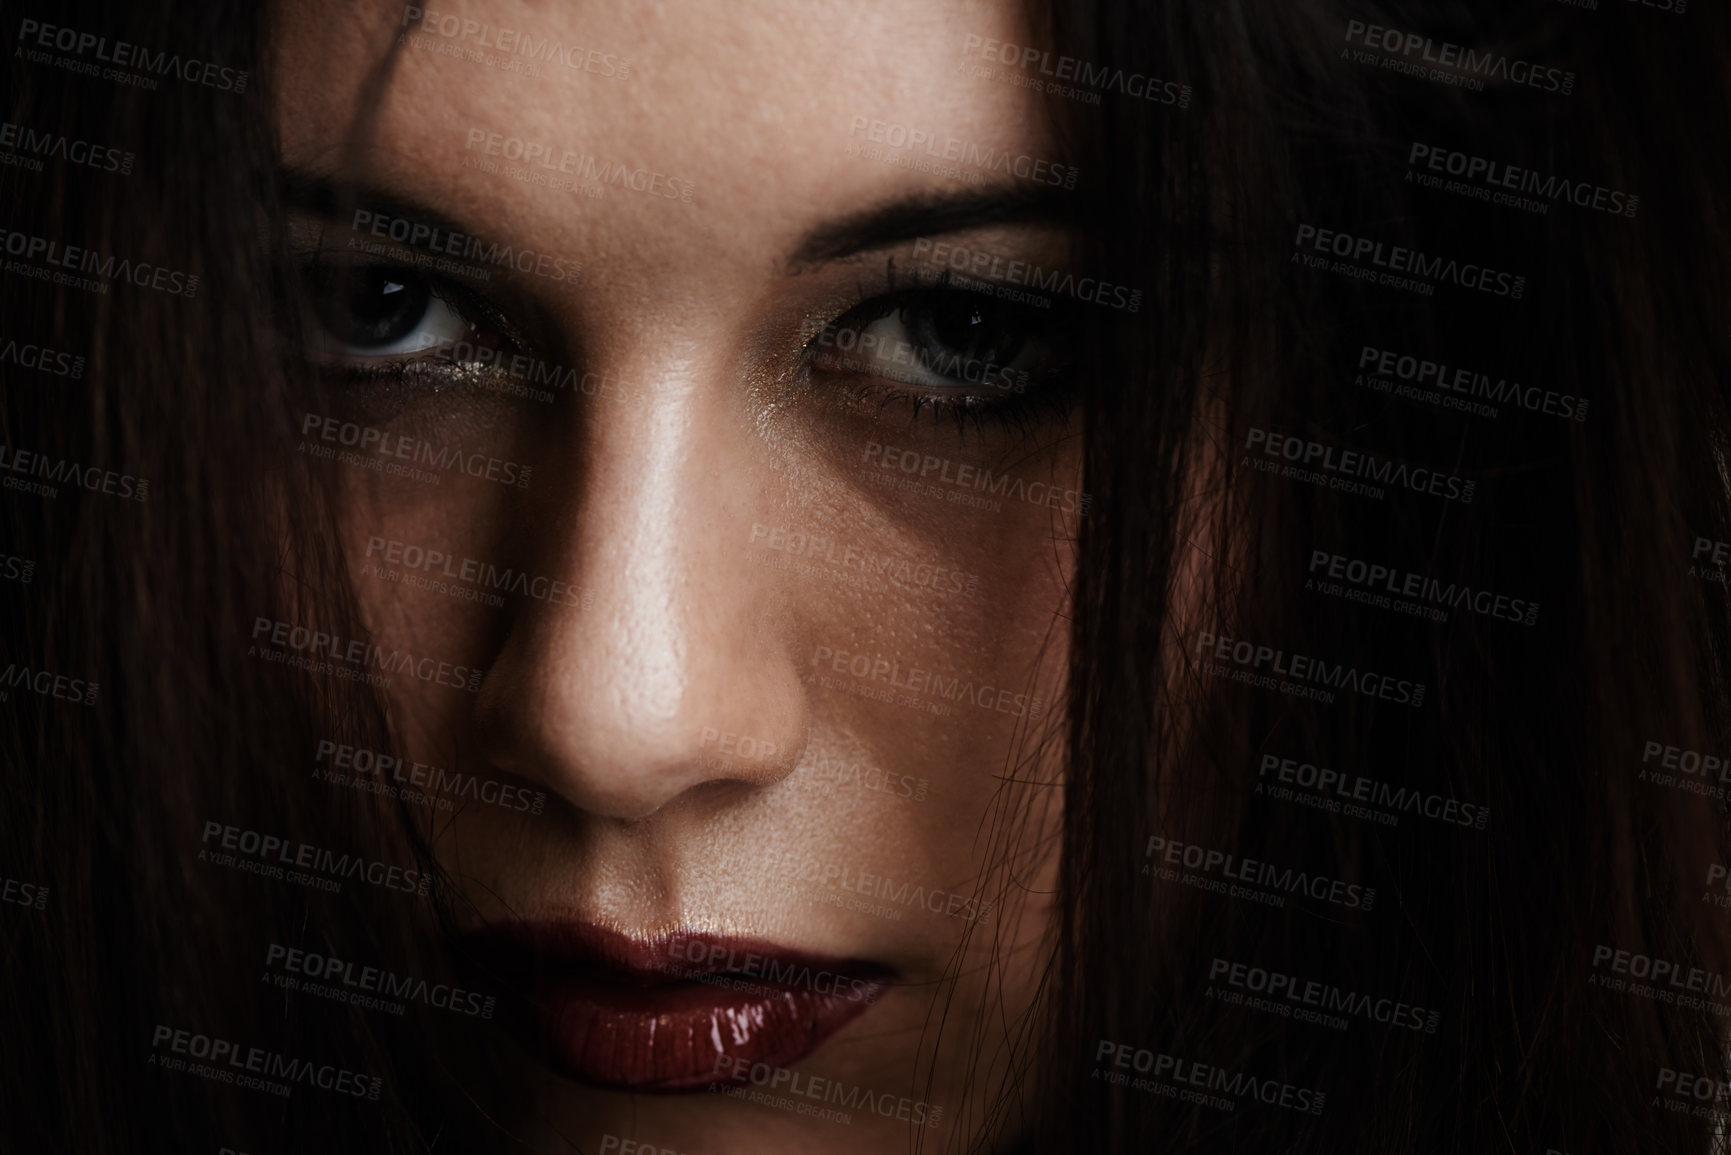 Buy stock photo Closely cropped portrait of a young woman